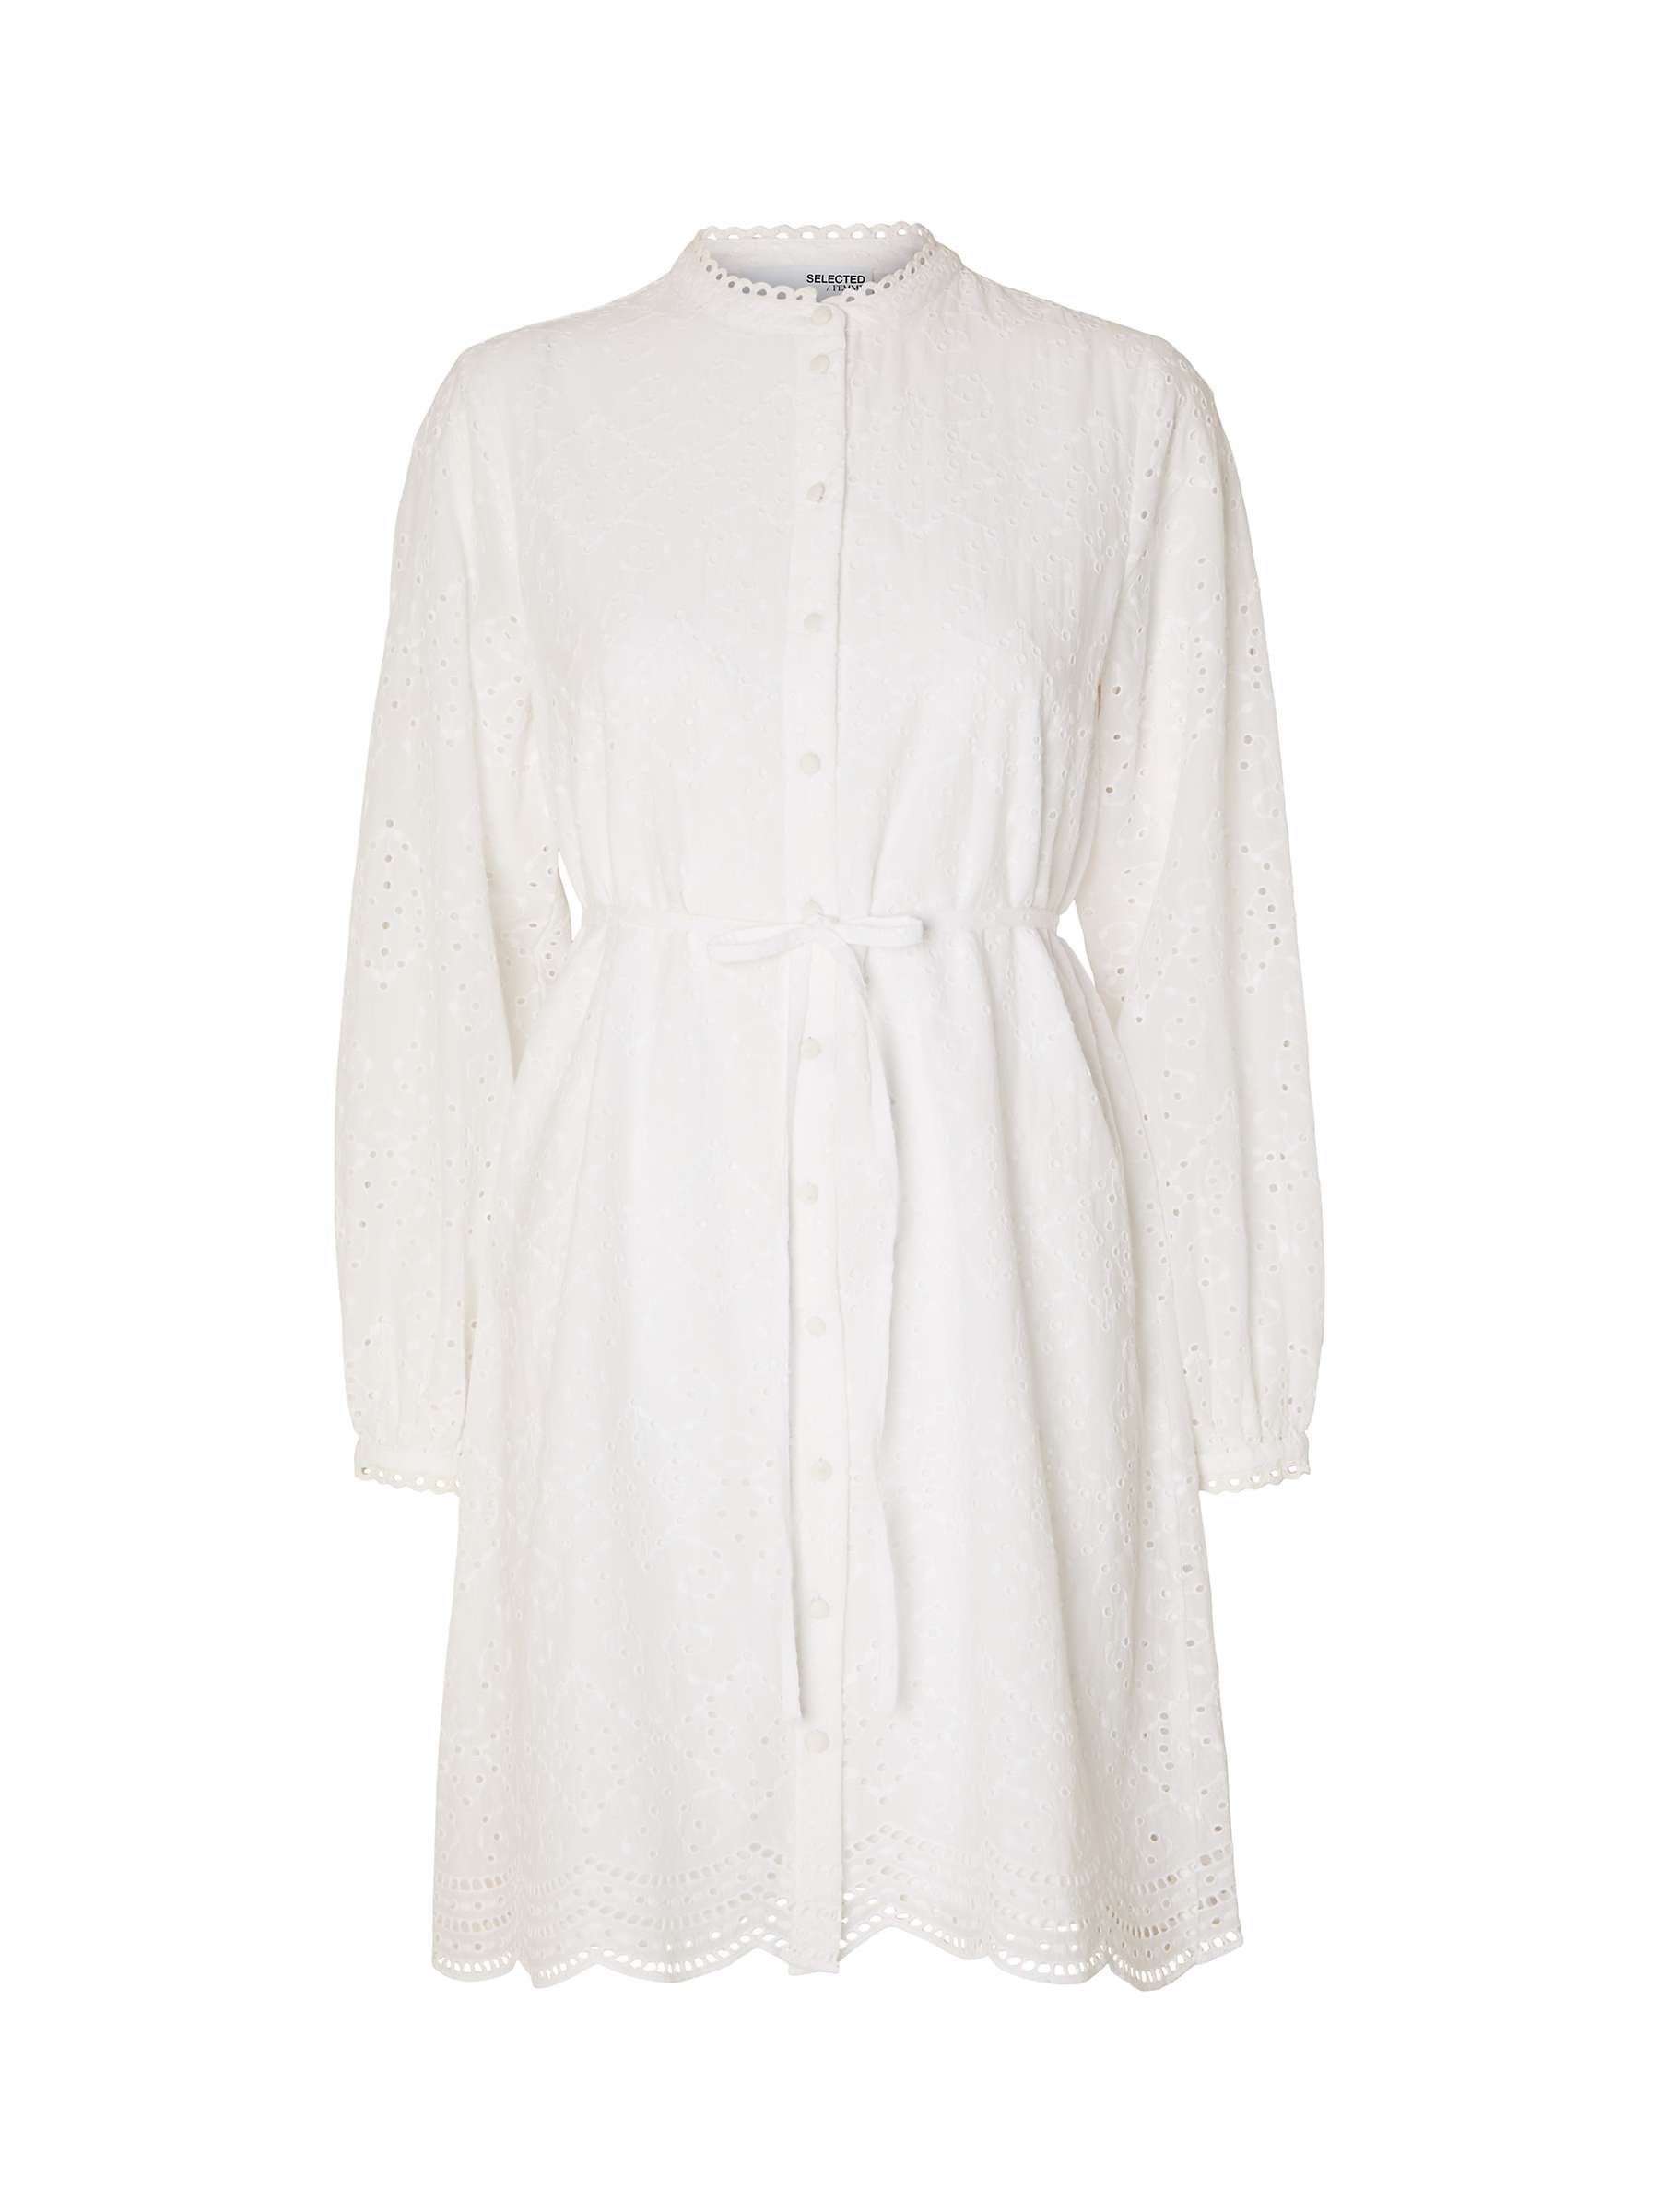 Buy SELECTED FEMME Broderie Anglaise Mini Dress Online at johnlewis.com